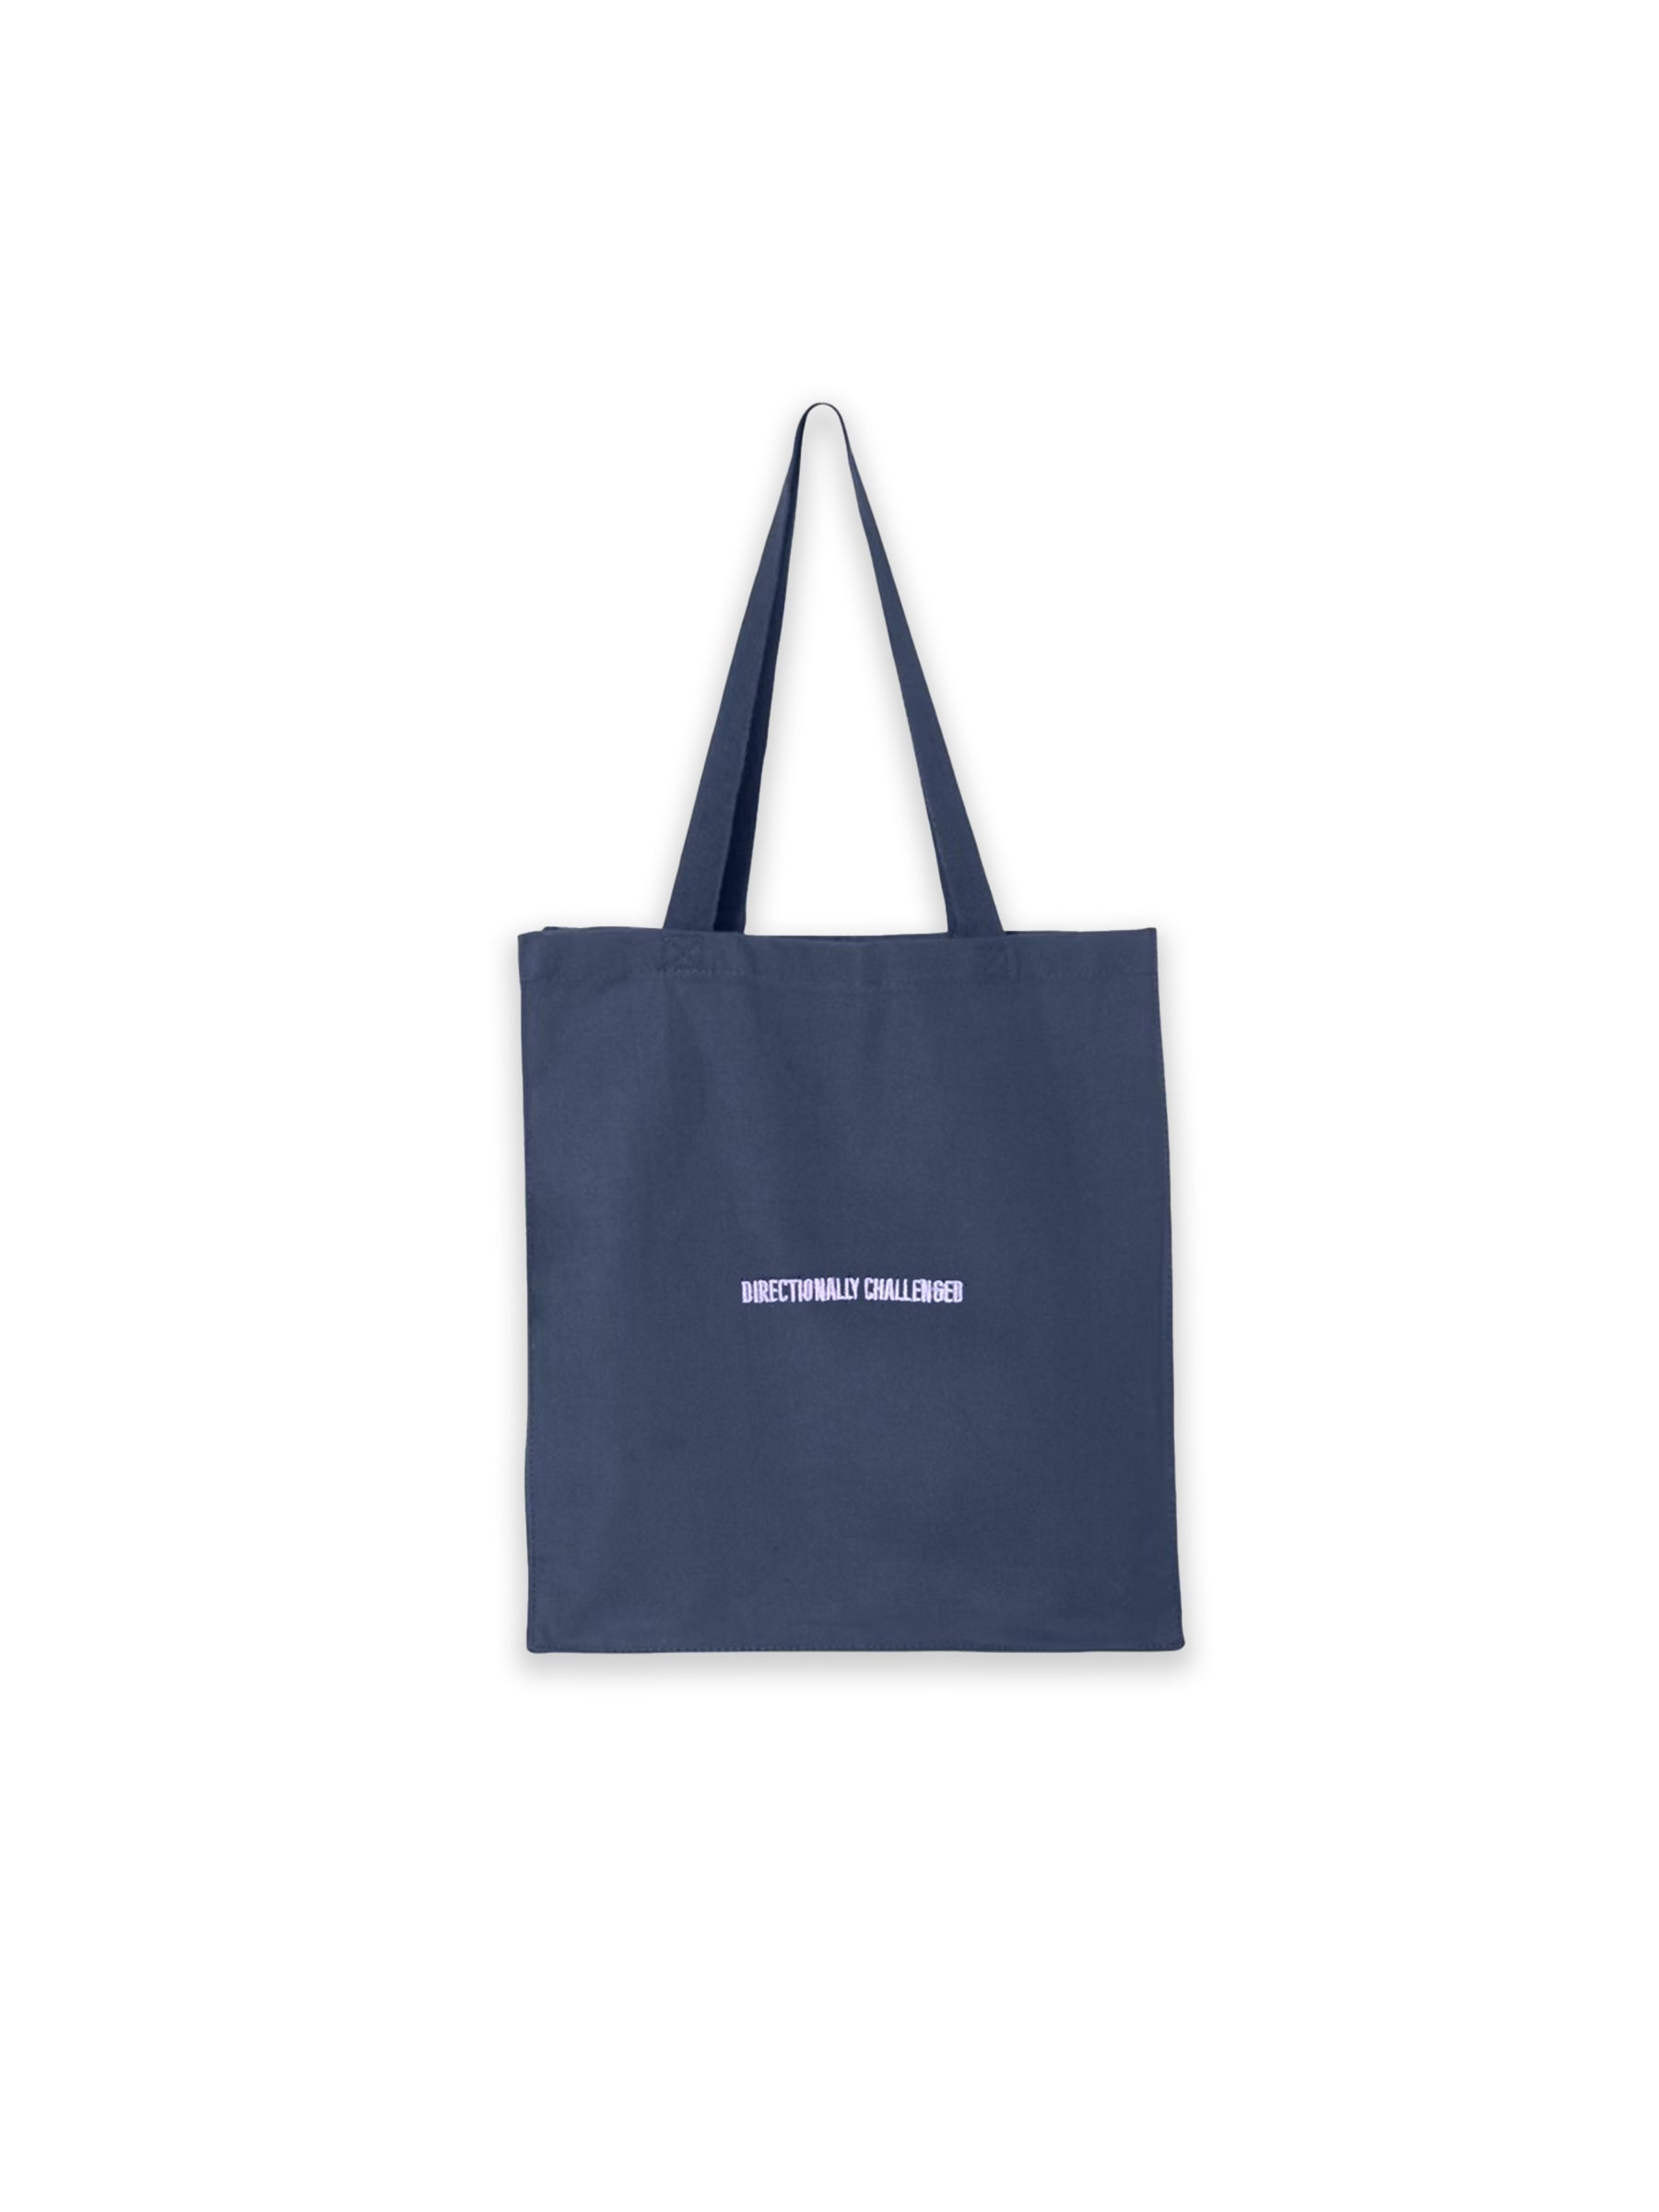 DIRECTIONALLY CHALLENGED TOTE BAG